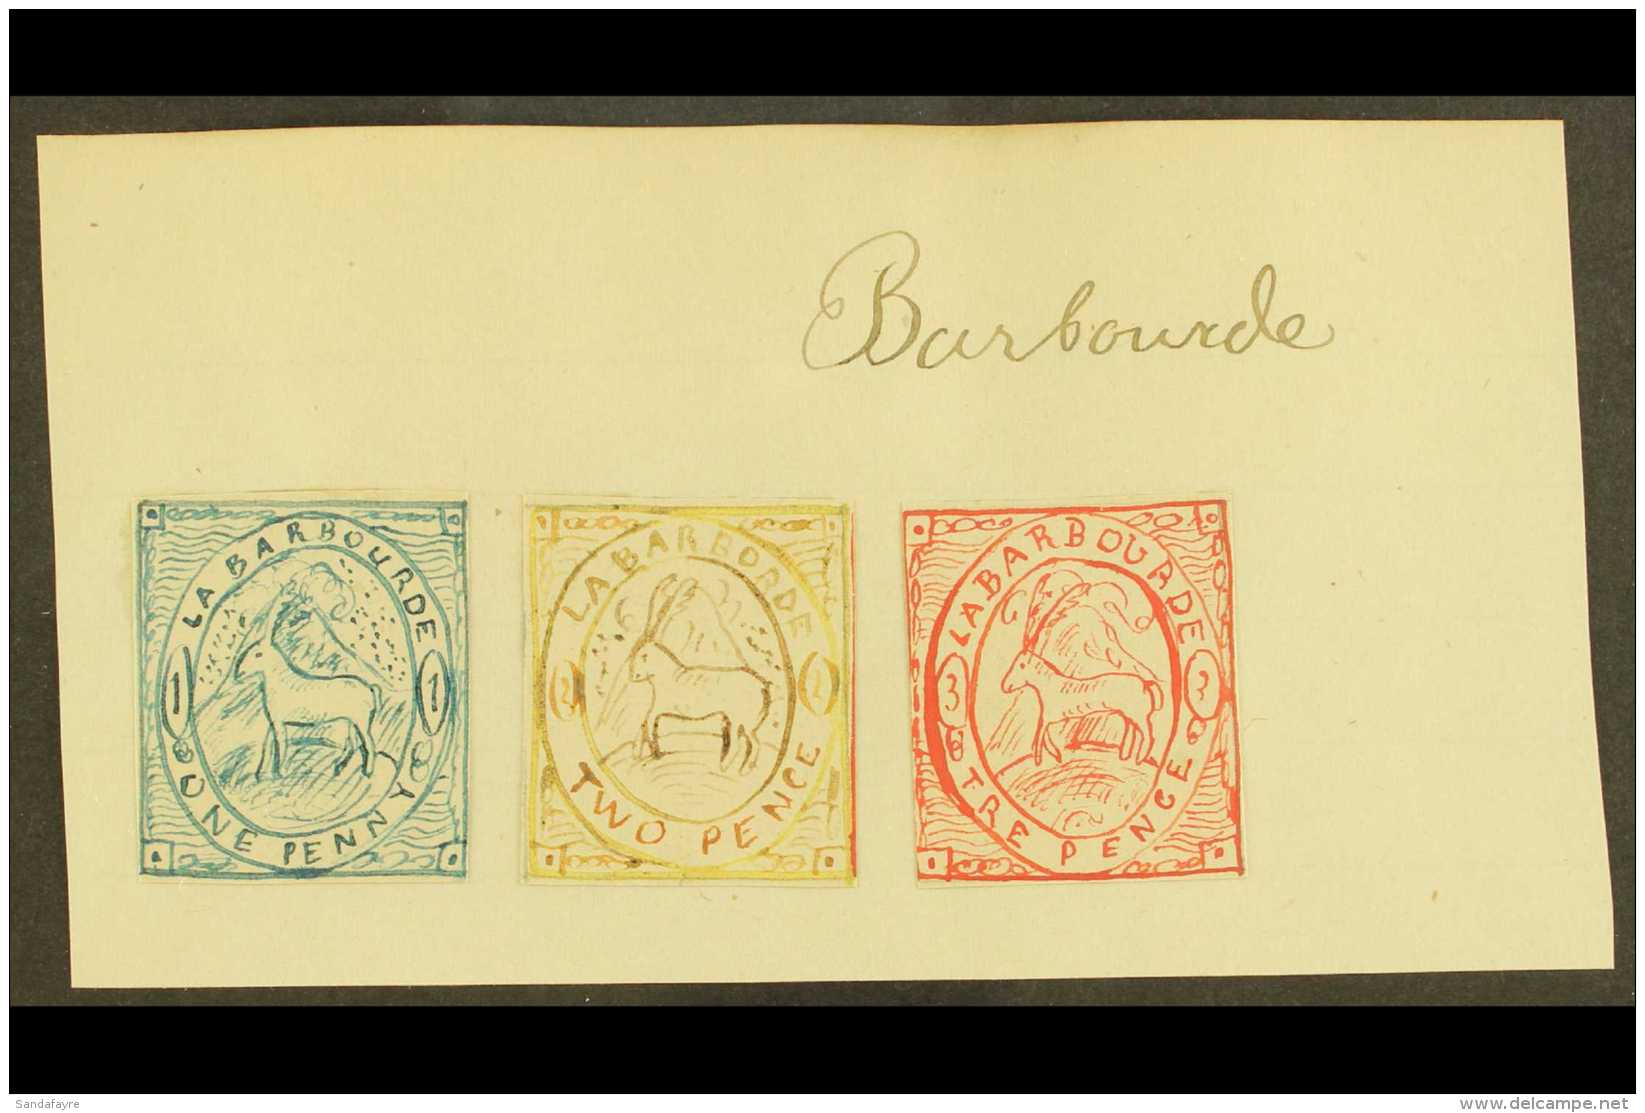 ANIMALS 1861 Hand Painted Stamp Sized Essays Created In France, Inscribed "La Barbourde" And Featuring An Antelope... - Non Classés